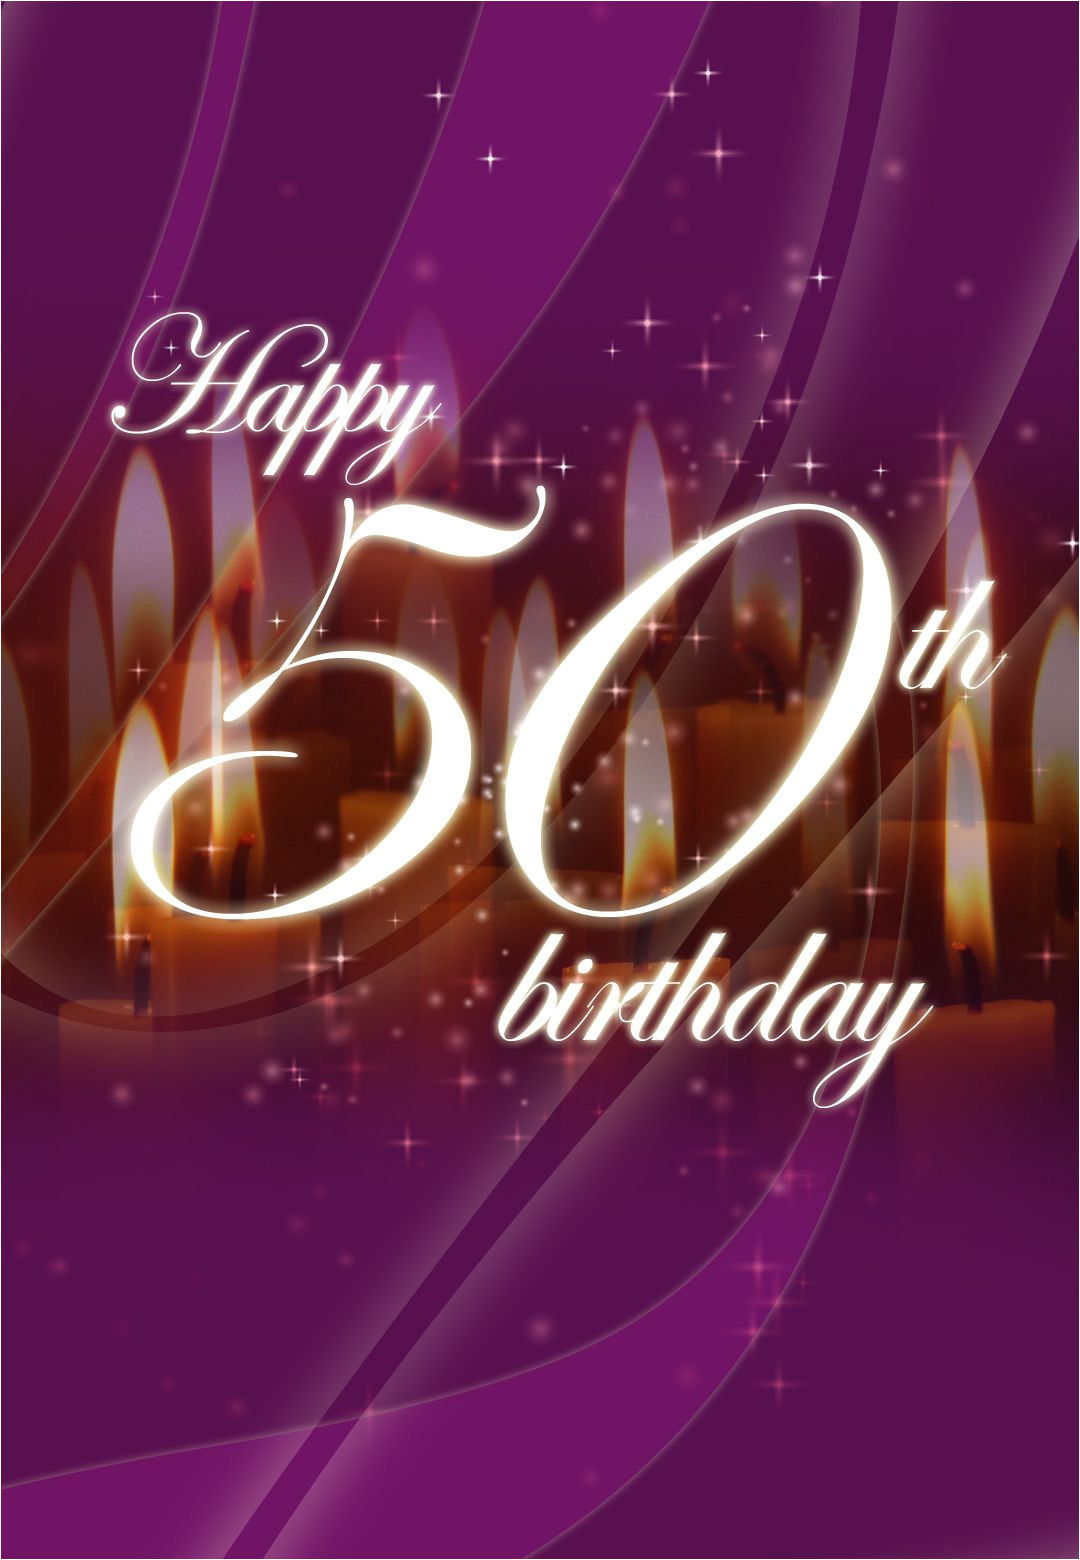 Card Sayings for 50th Birthday Free Printable Happy 50th Birthday Greeting Card Happy